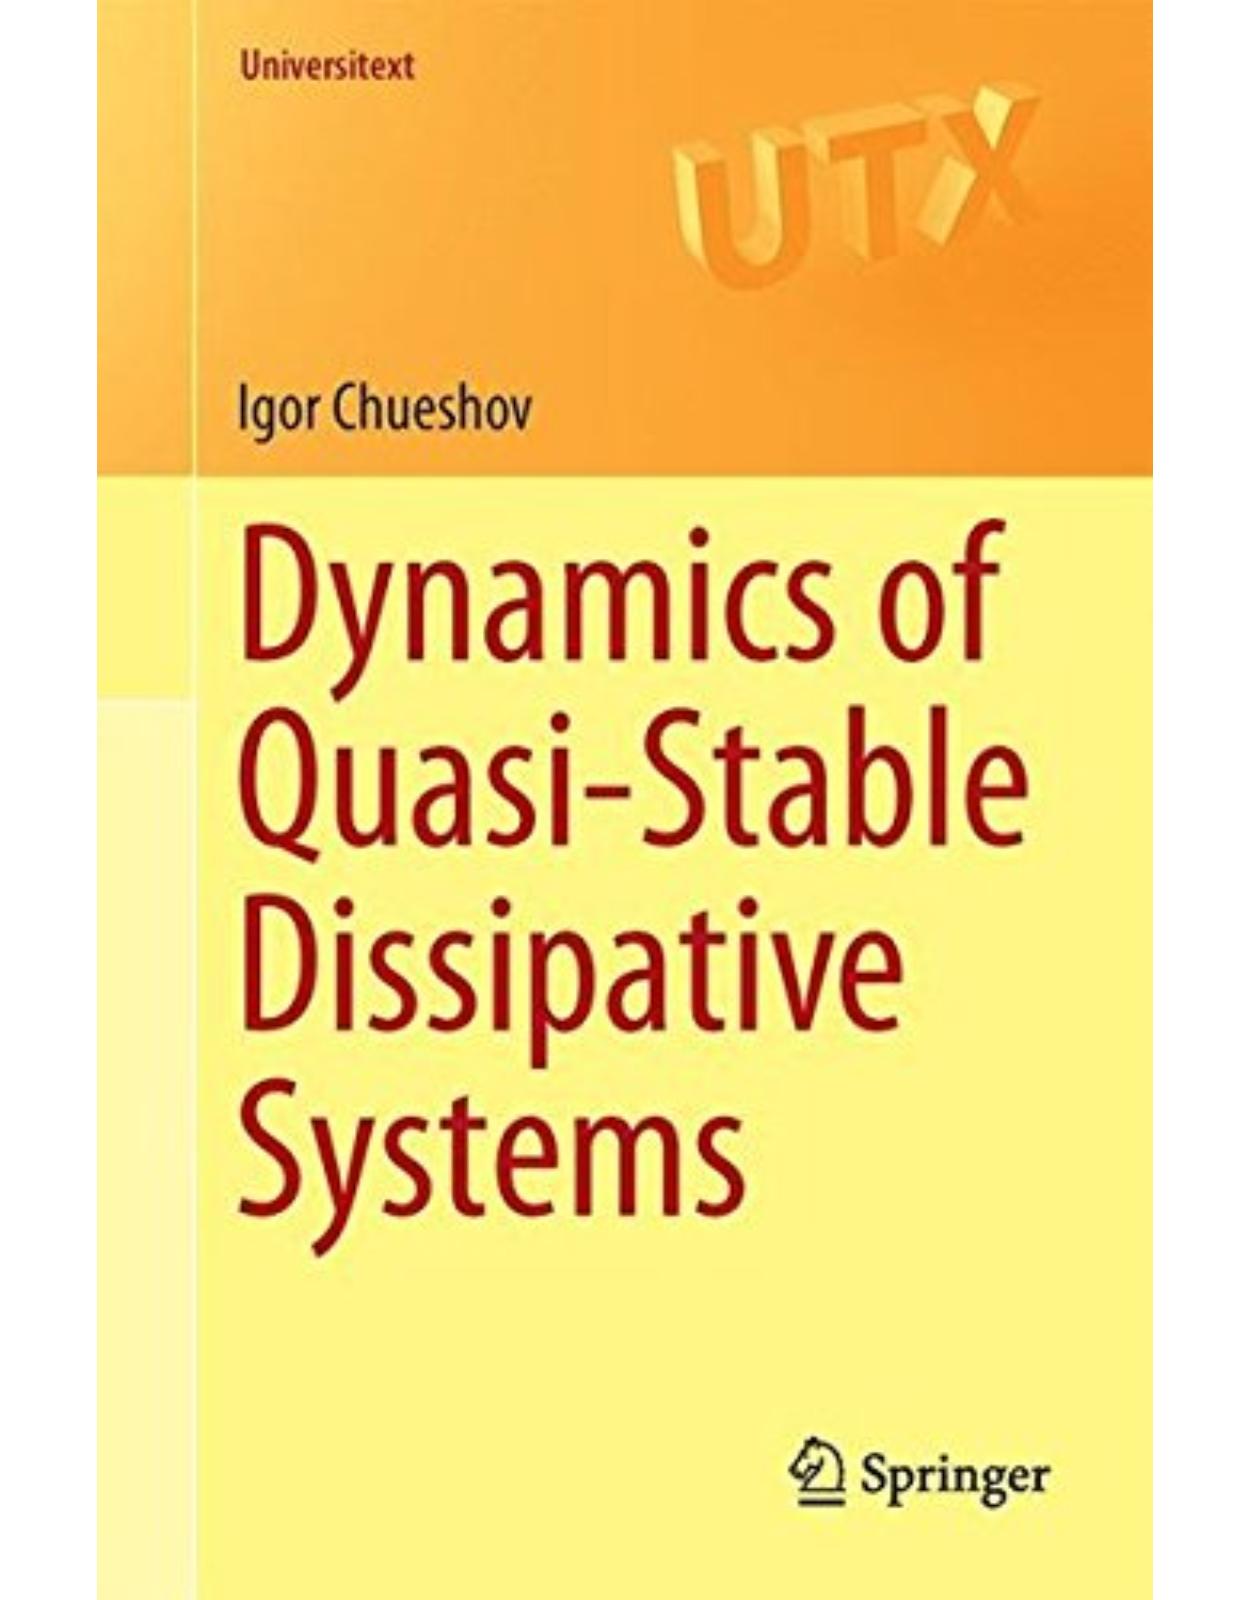  Dynamics of Quasi-Stable Dissipative Systems